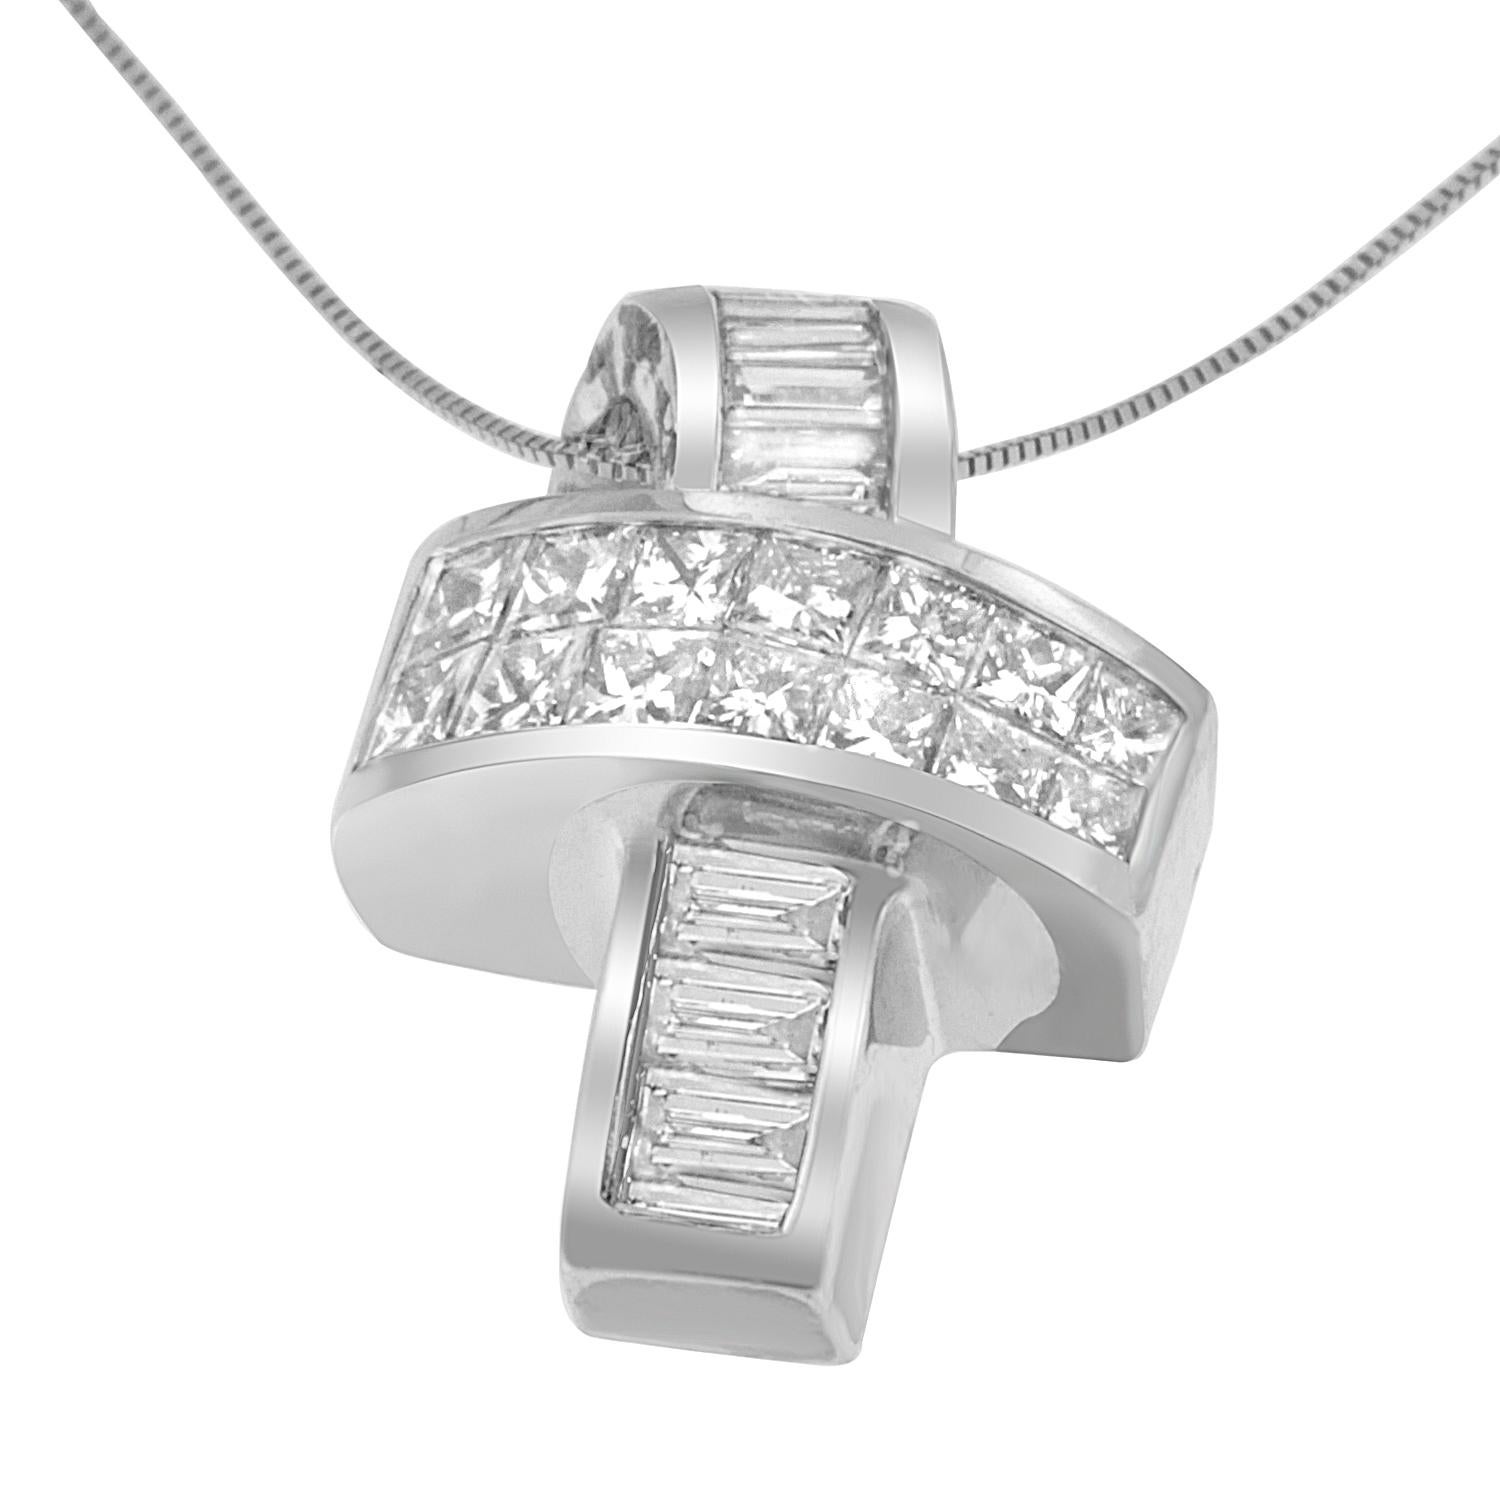 Girly meets glamorous! A sprinkling of princess and baguette cut diamonds beautifully dot this radiant, ribbon-shaped pendant, which is set in 14 karat white gold to let her embrace her feminine side. This beautiful necklace includes 18” box chain